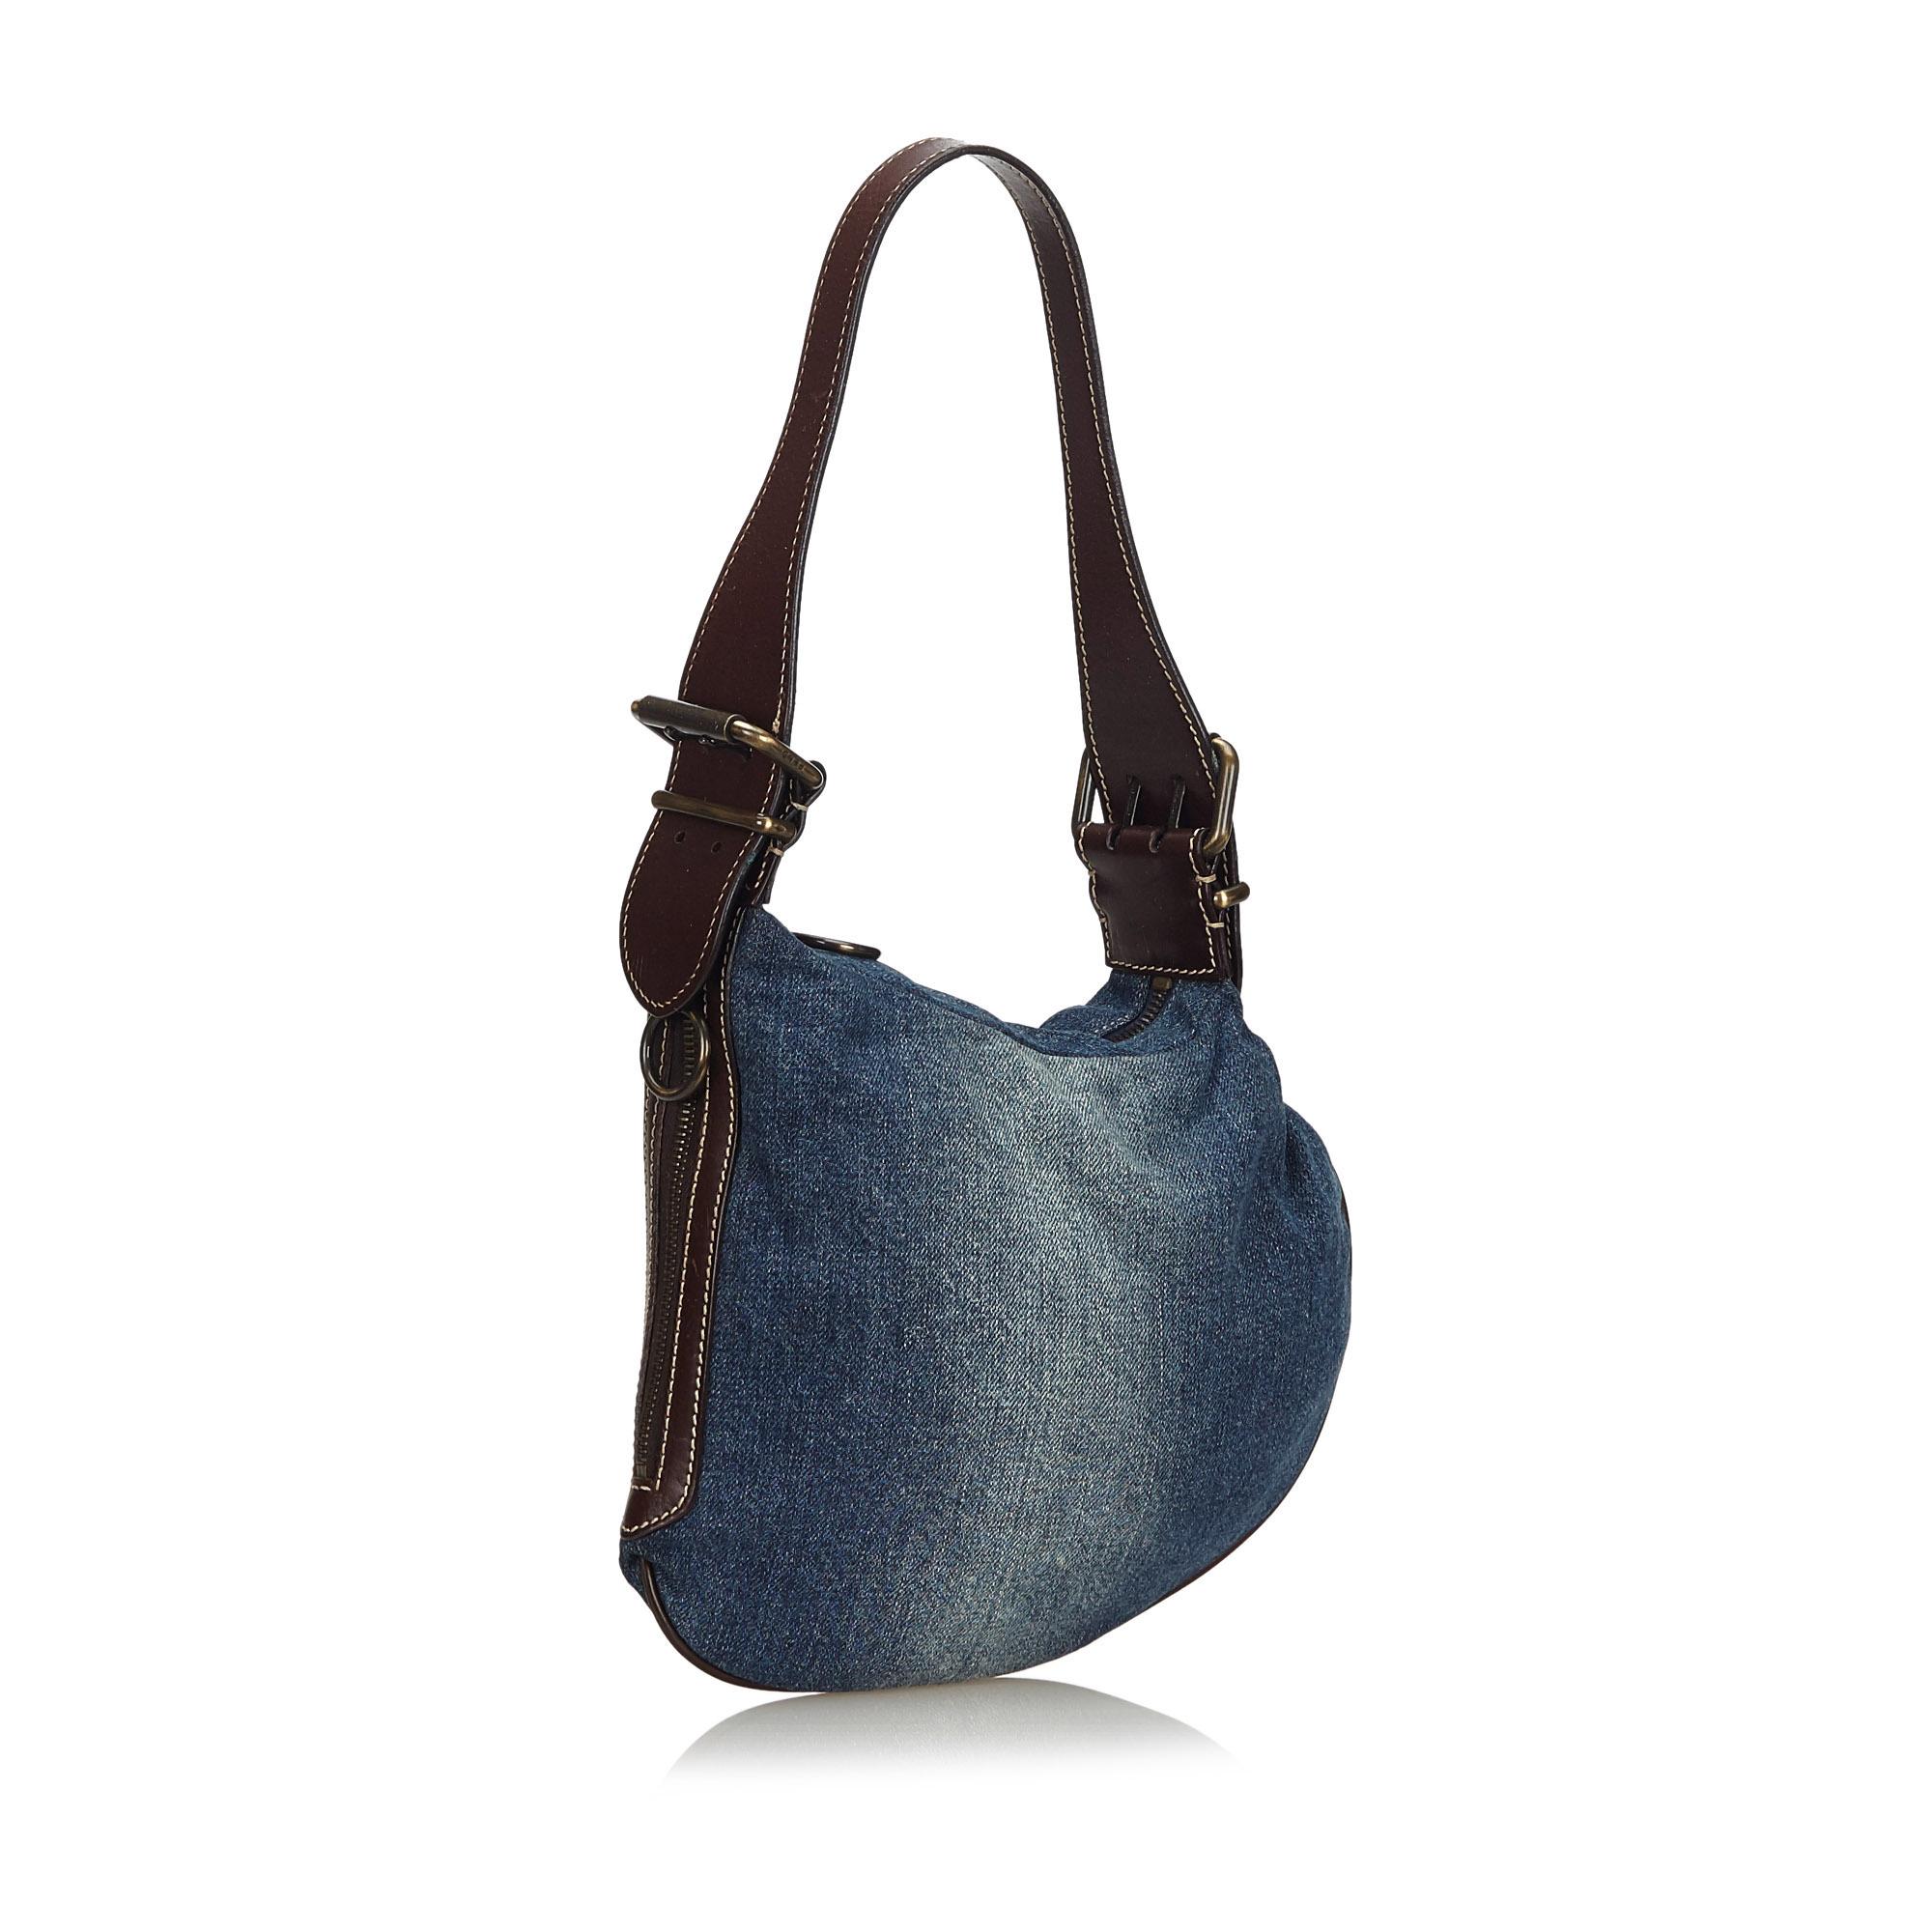 The Oyster bag features a denim body, flat leather strap, and a top zip closure. It carries as AB condition rating.

Inclusions: 
This item does not come with inclusions.

Dimensions:
Length: 23.00 cm
Width: 26.00 cm
Depth: 3.00 cm
Shoulder Drop: